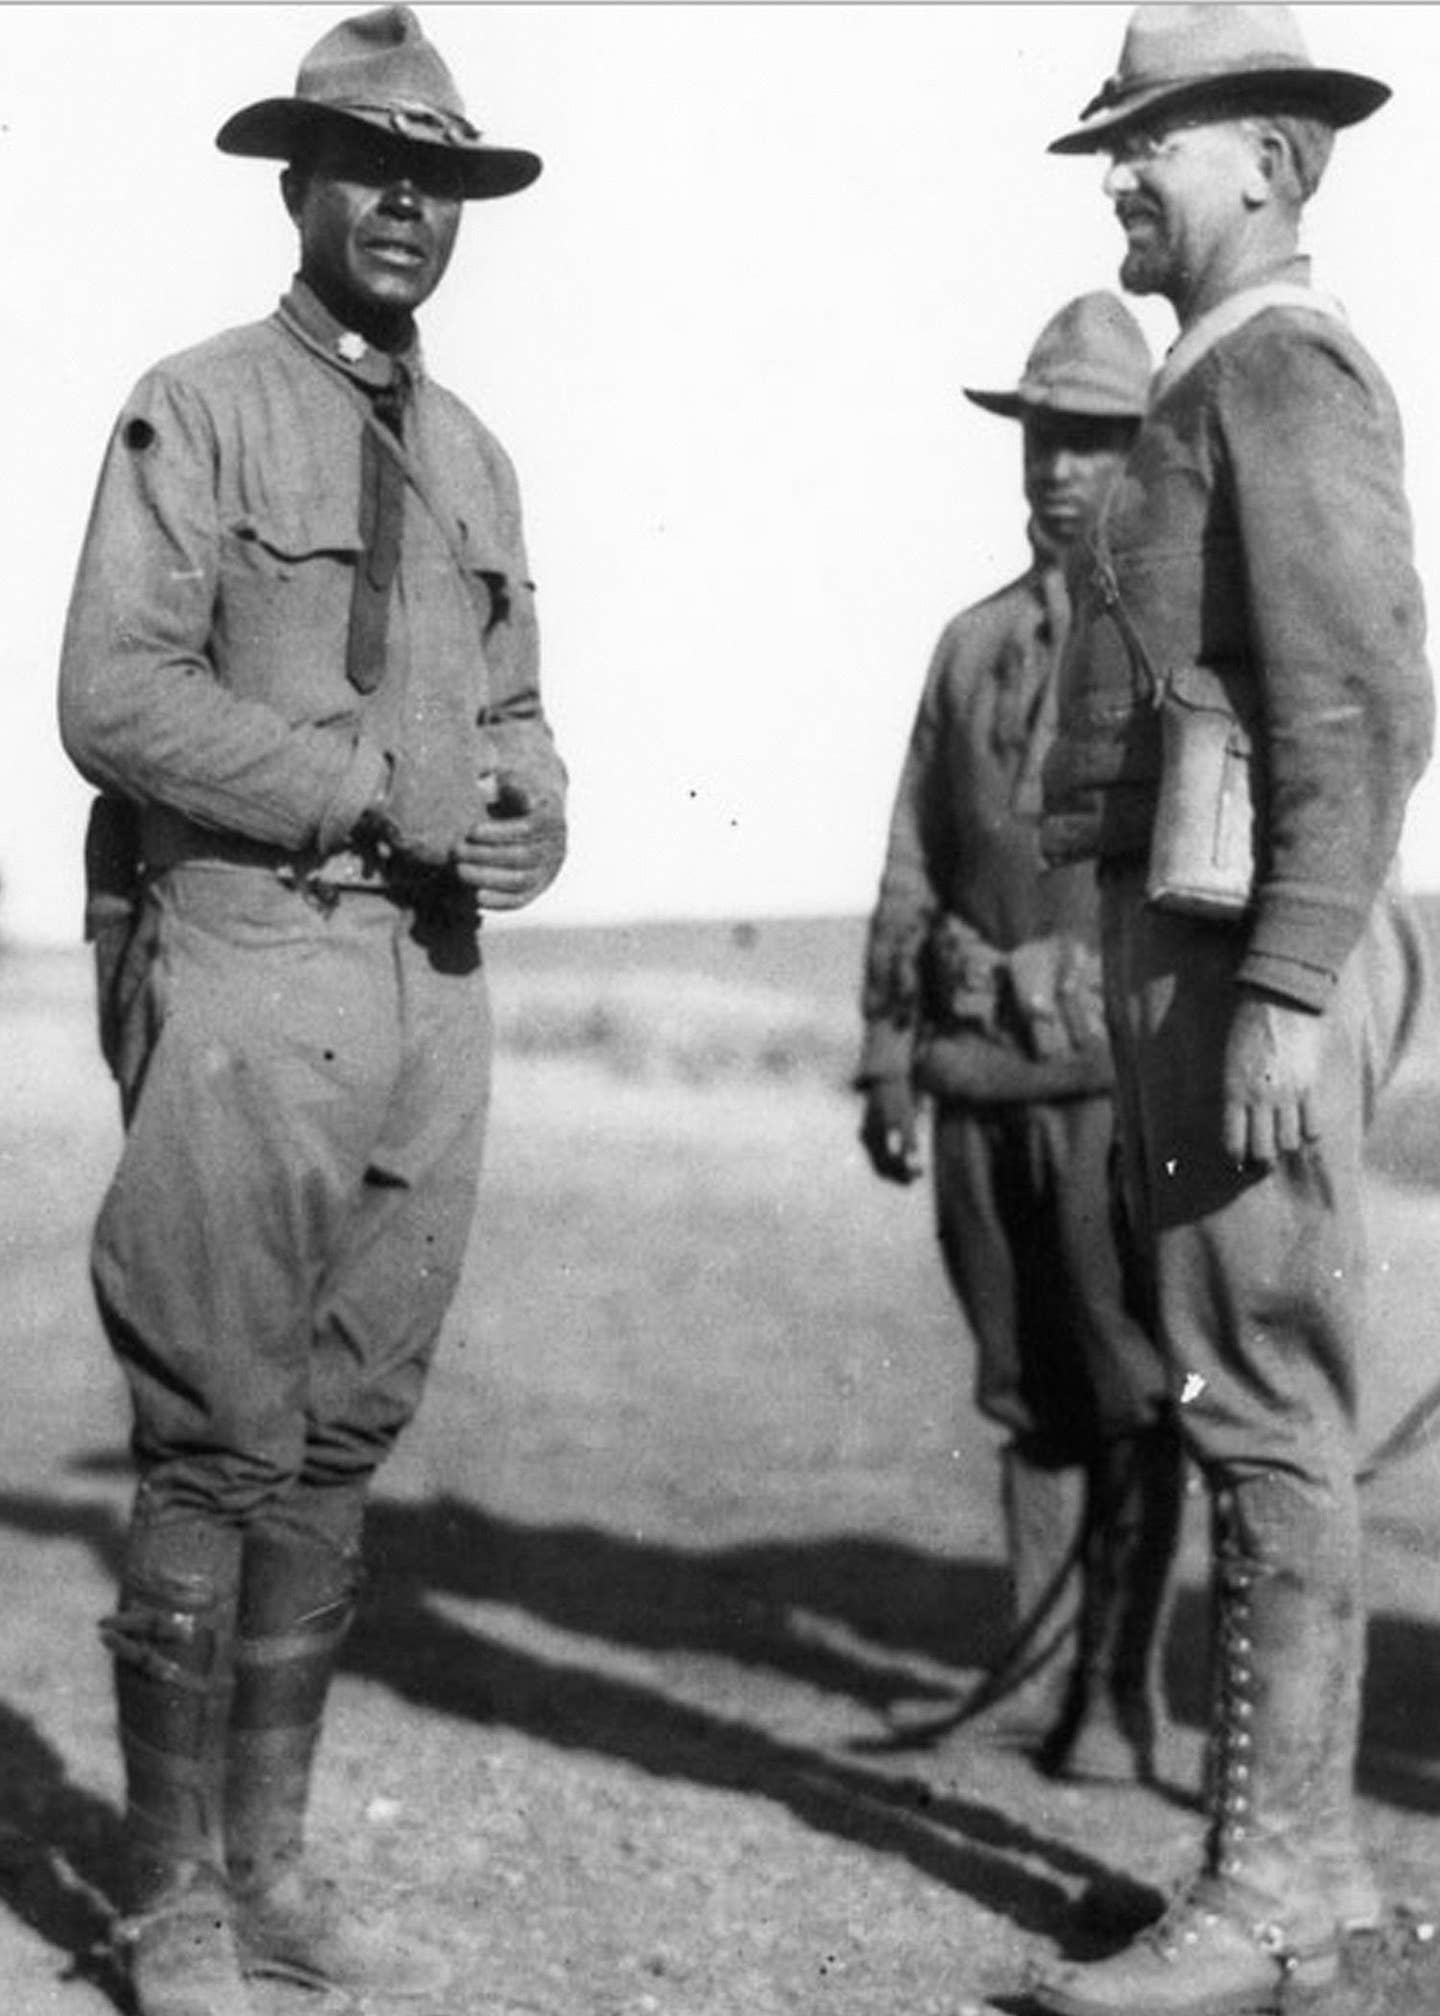 Major Charles Young, age 52, during the Punitive Expedition with the 10th Cavalry in Mexico, 1916.